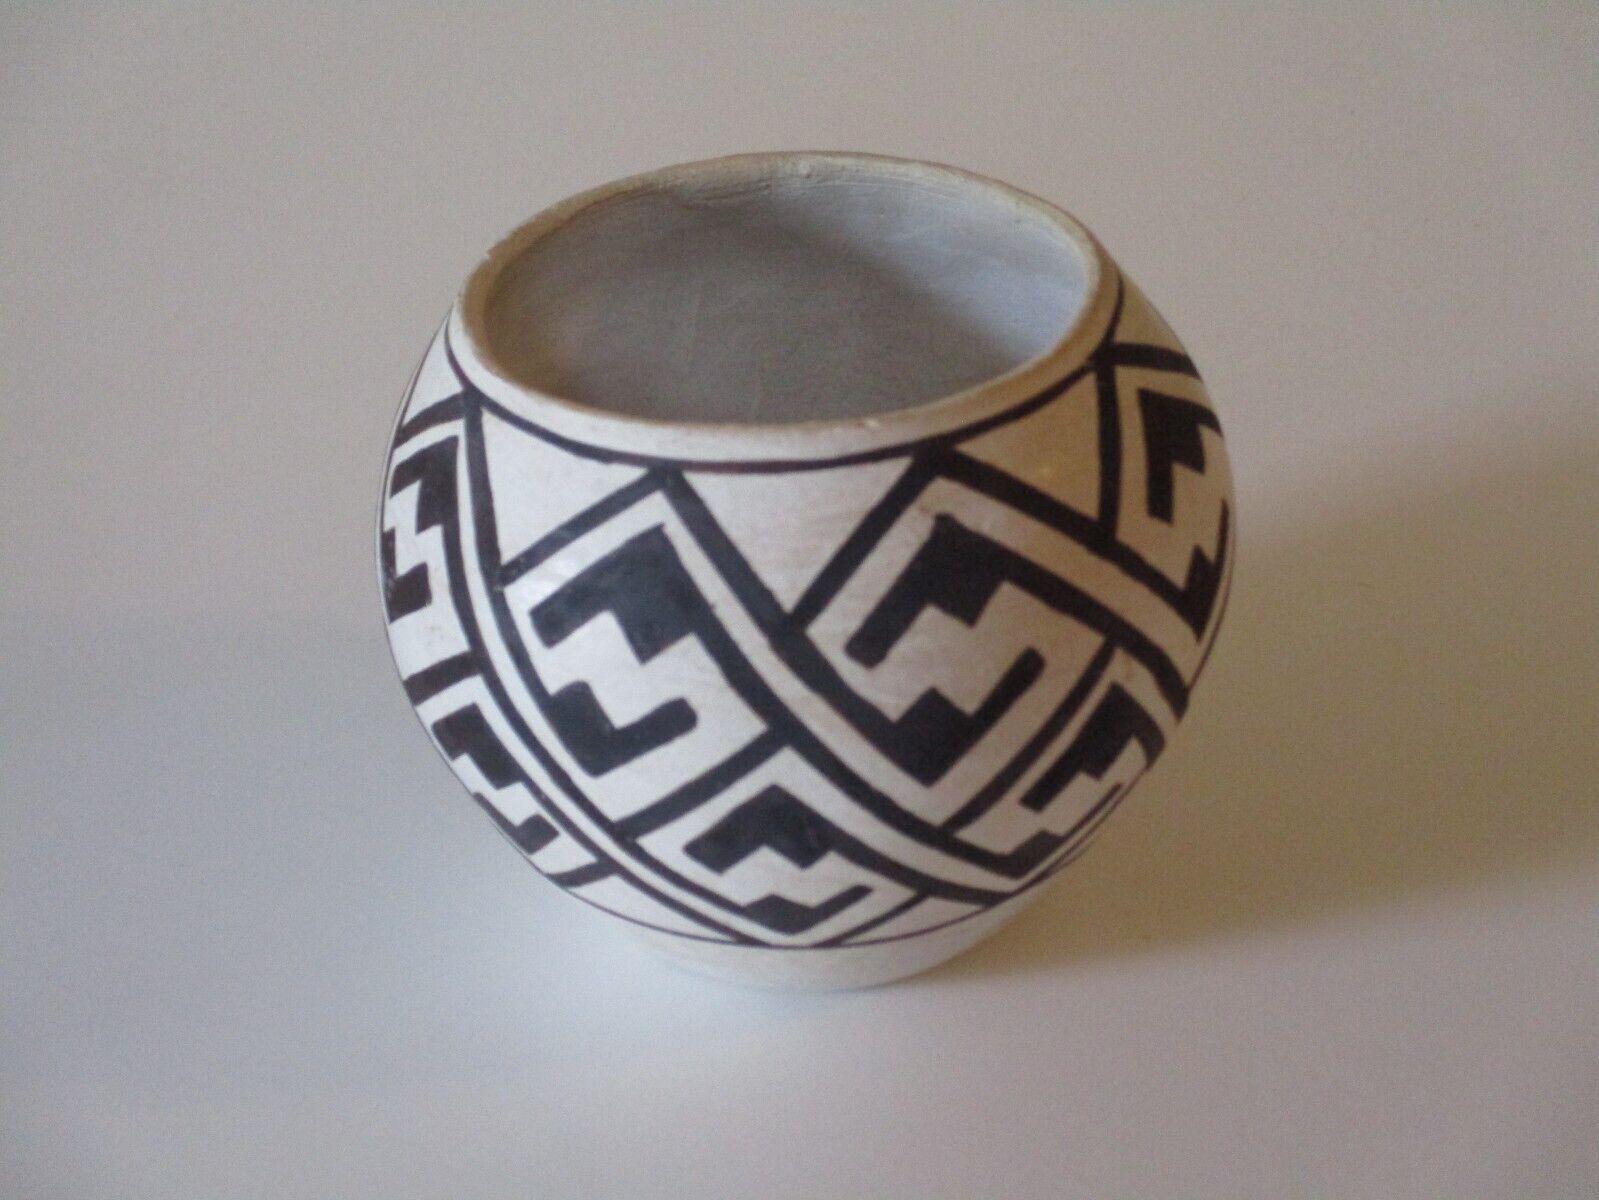 Vintage Hand-Painted Acoma Pottery Bowl in Black & White Pattern